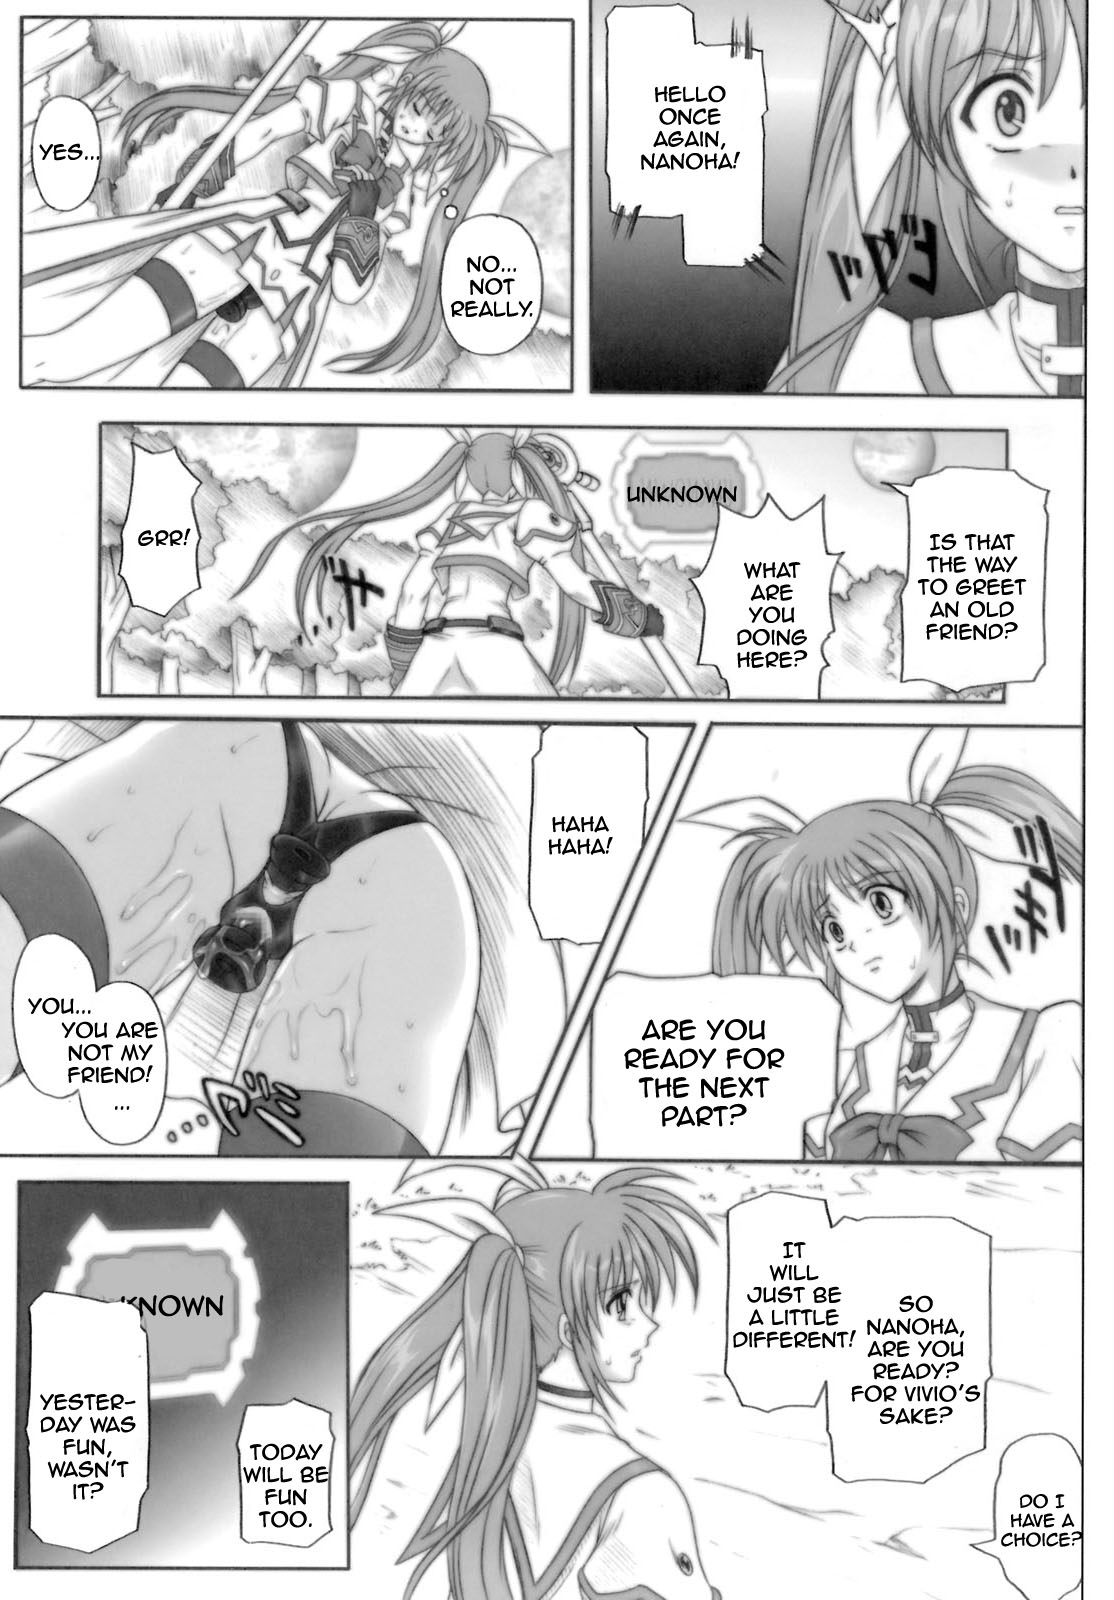 840 Color Classic Situation Note Extention (Mahou Shoujo Lyrical Nanoha) [English] [Rewrite] page 17 full